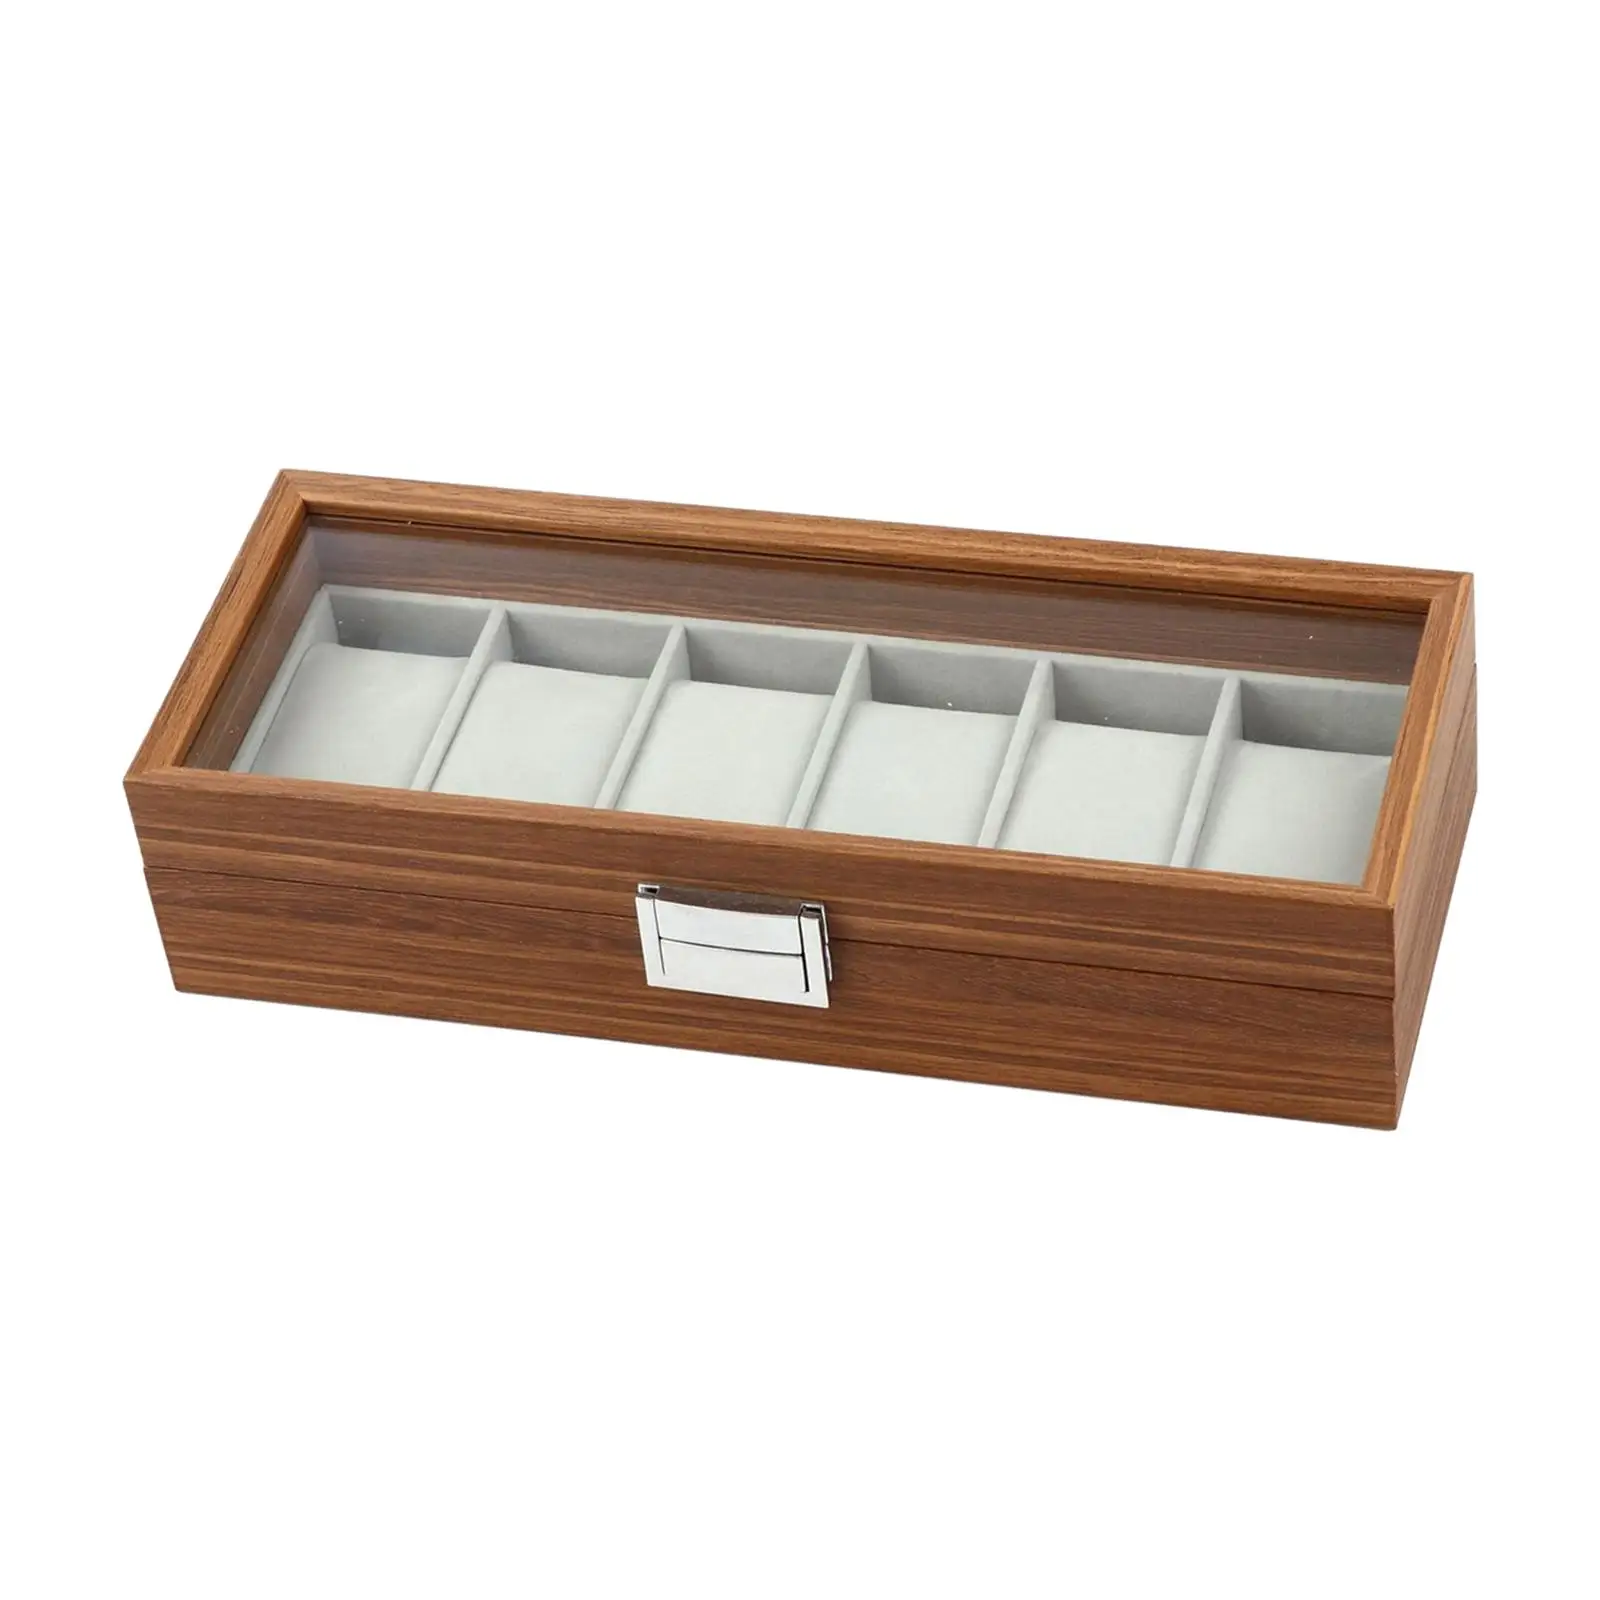 Watch Box Organizer 6 Slot with Lid Lockable Wood Watch Box for Watches Necklace Bracelet Earrings Men Women Home Decoration